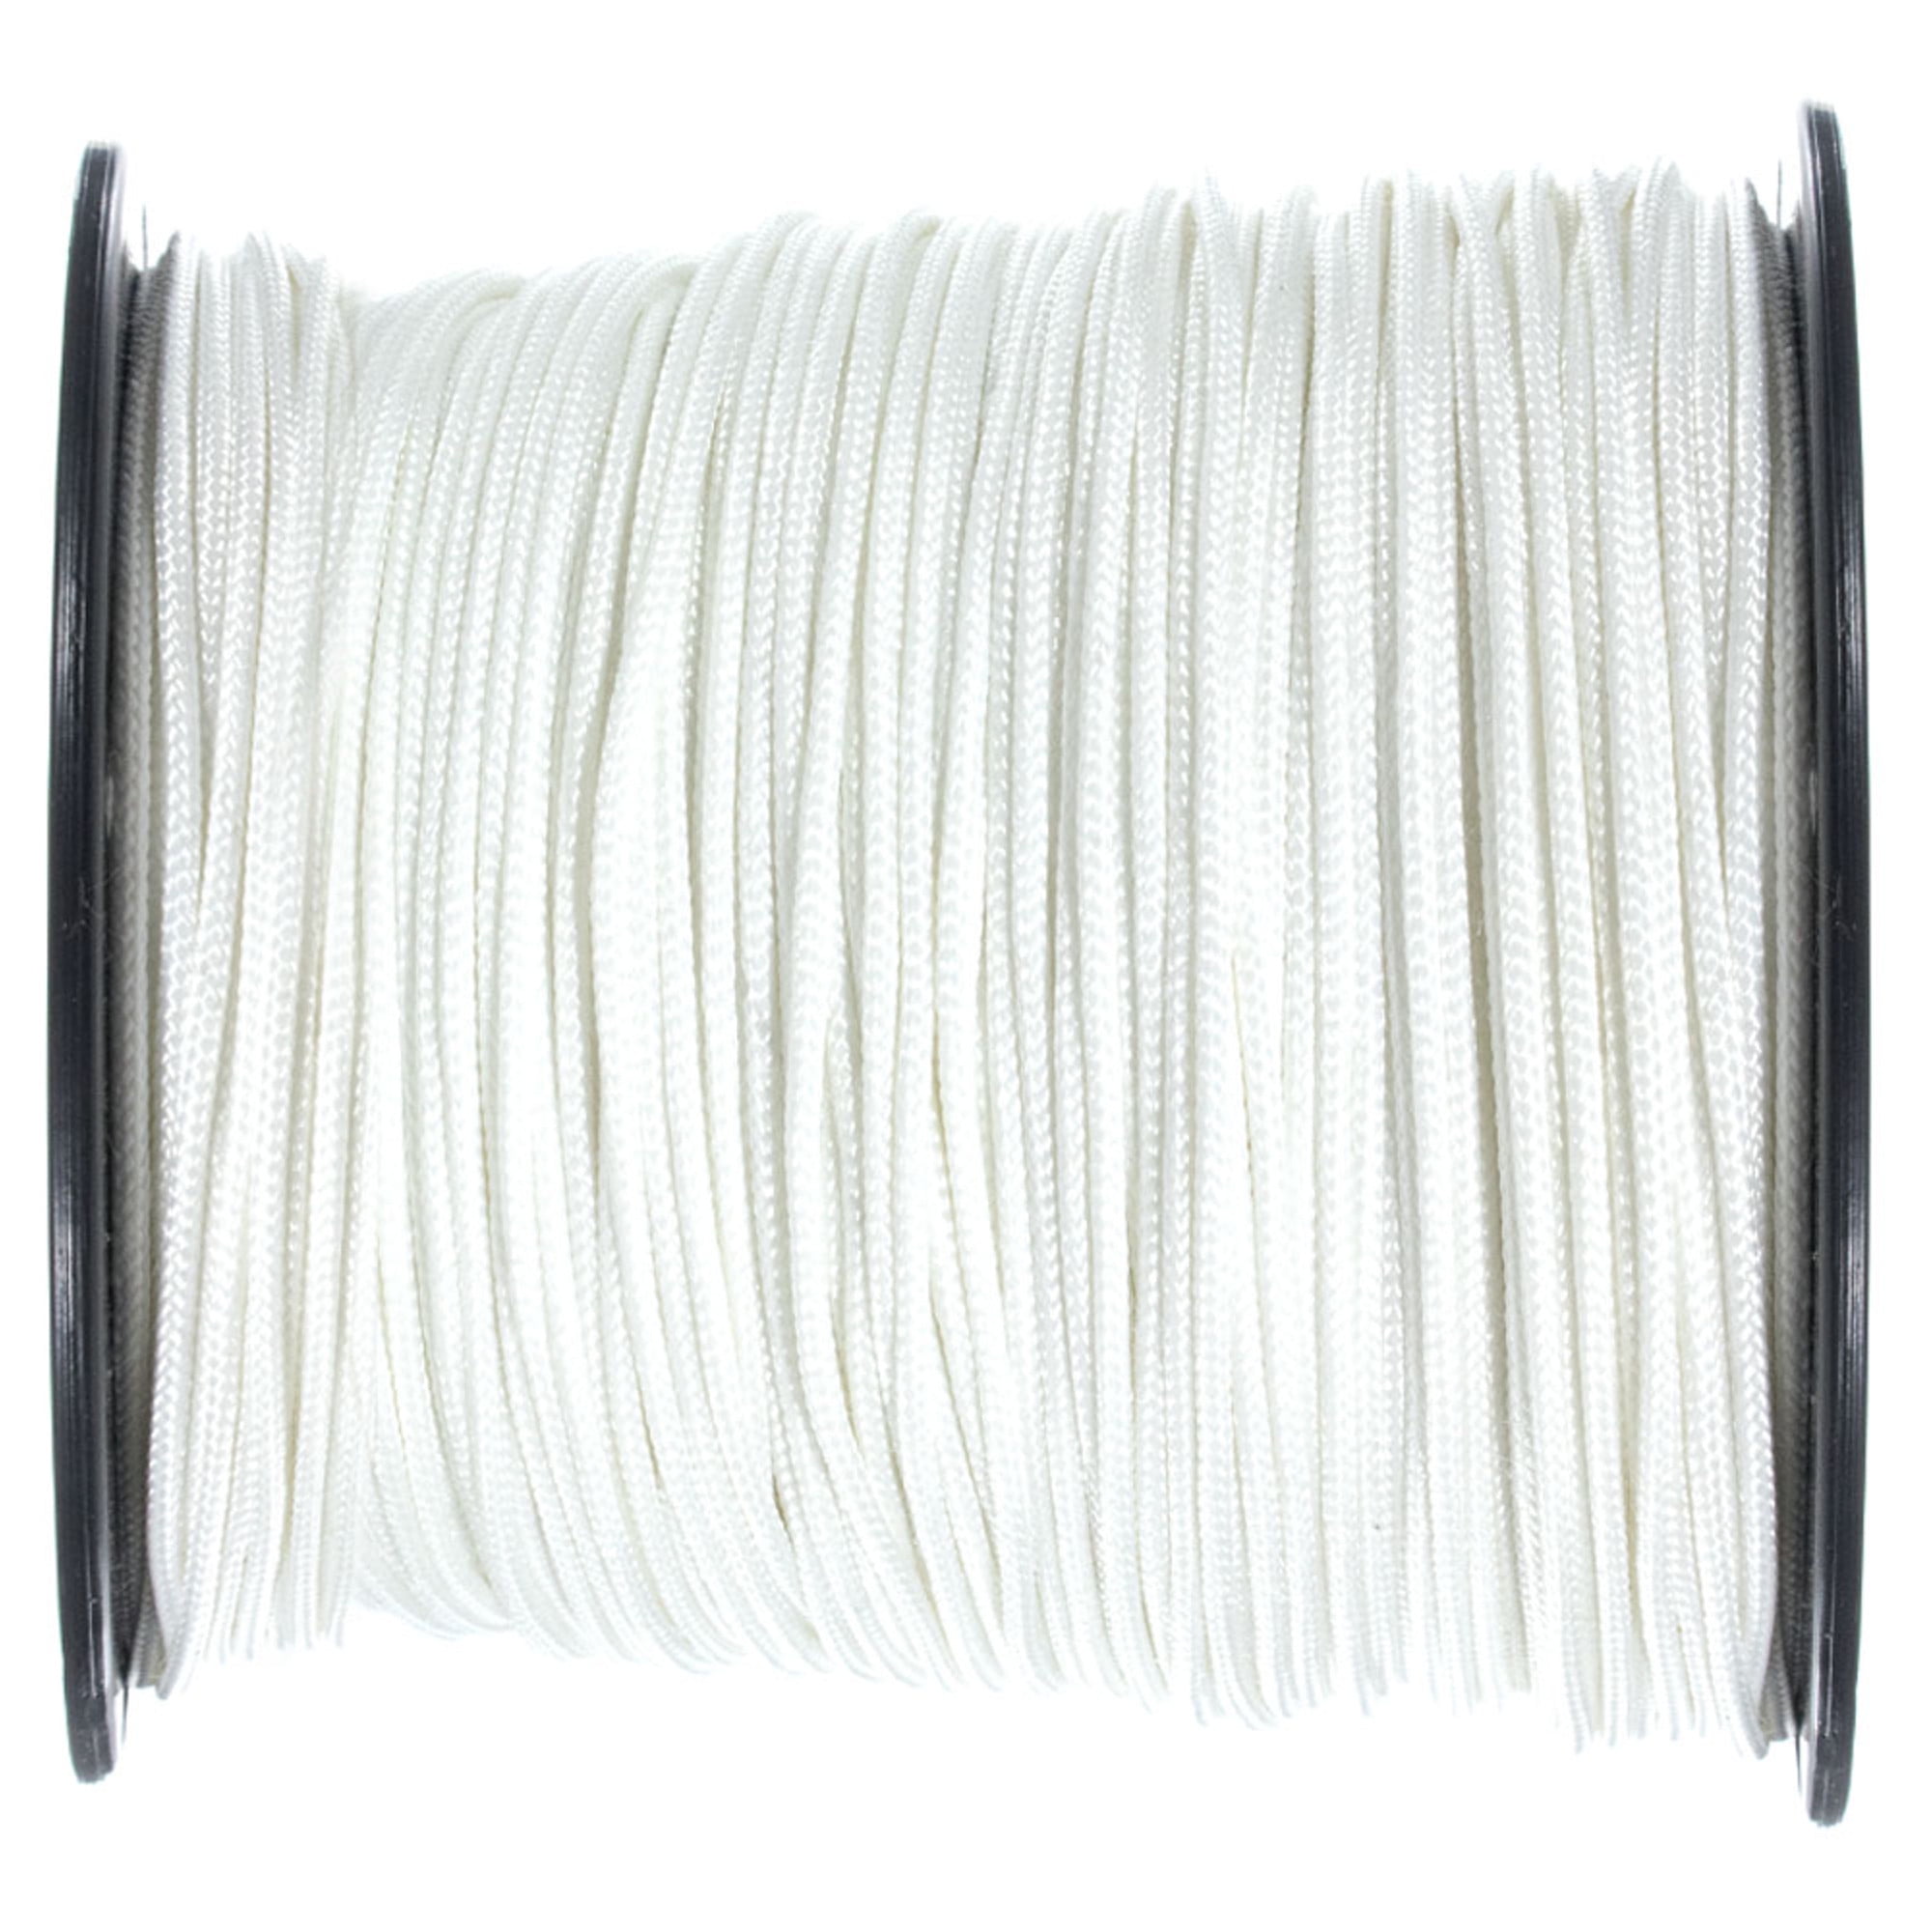 Golberg Solid Braid 5/16-inch Utility Rope Available in various sizes & colors. 